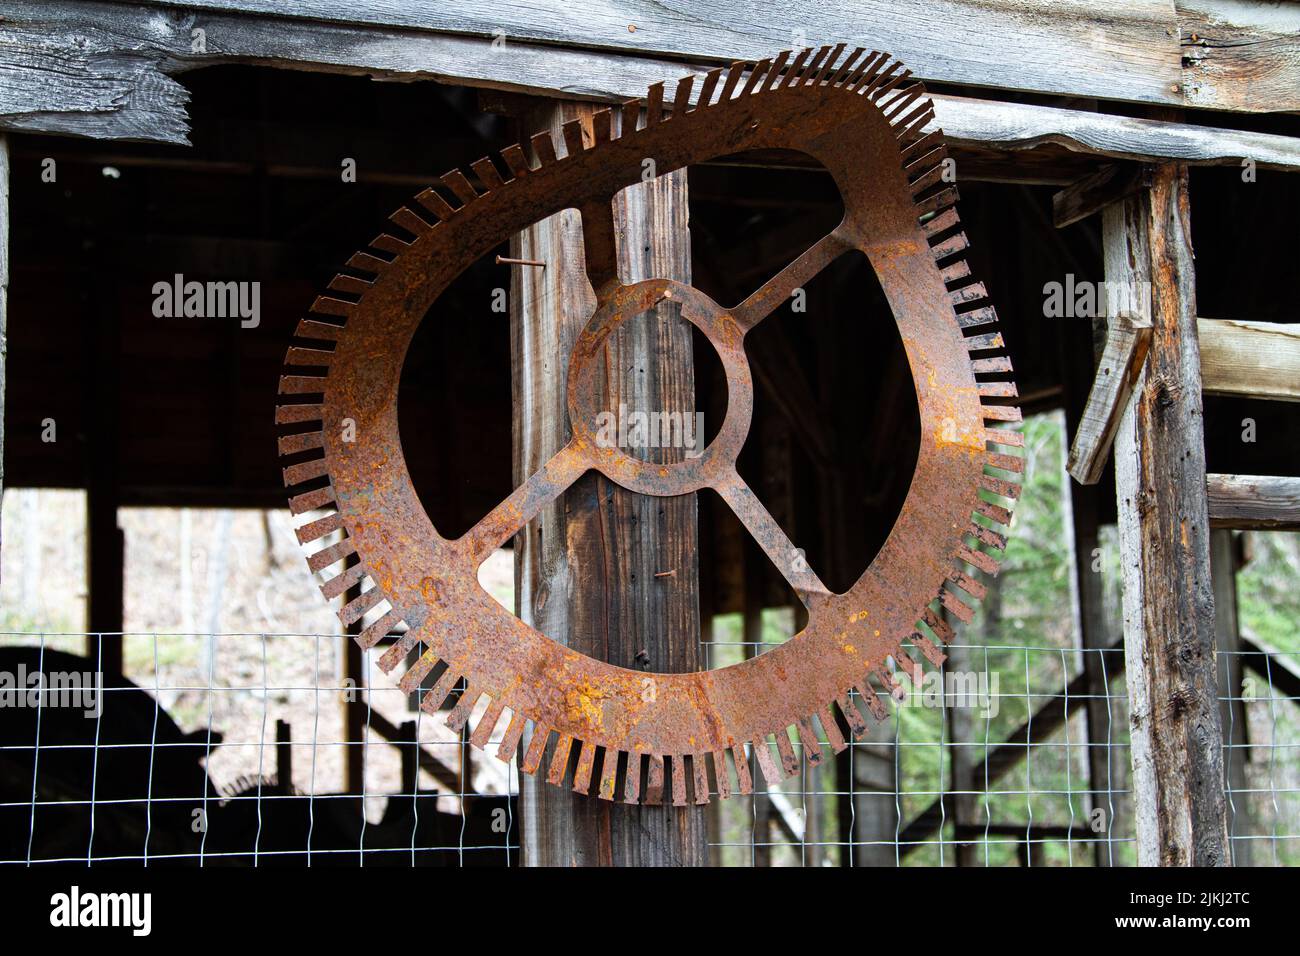 A closeup shot of an old rustic industrial equipment hanging on a wooden column Stock Photo